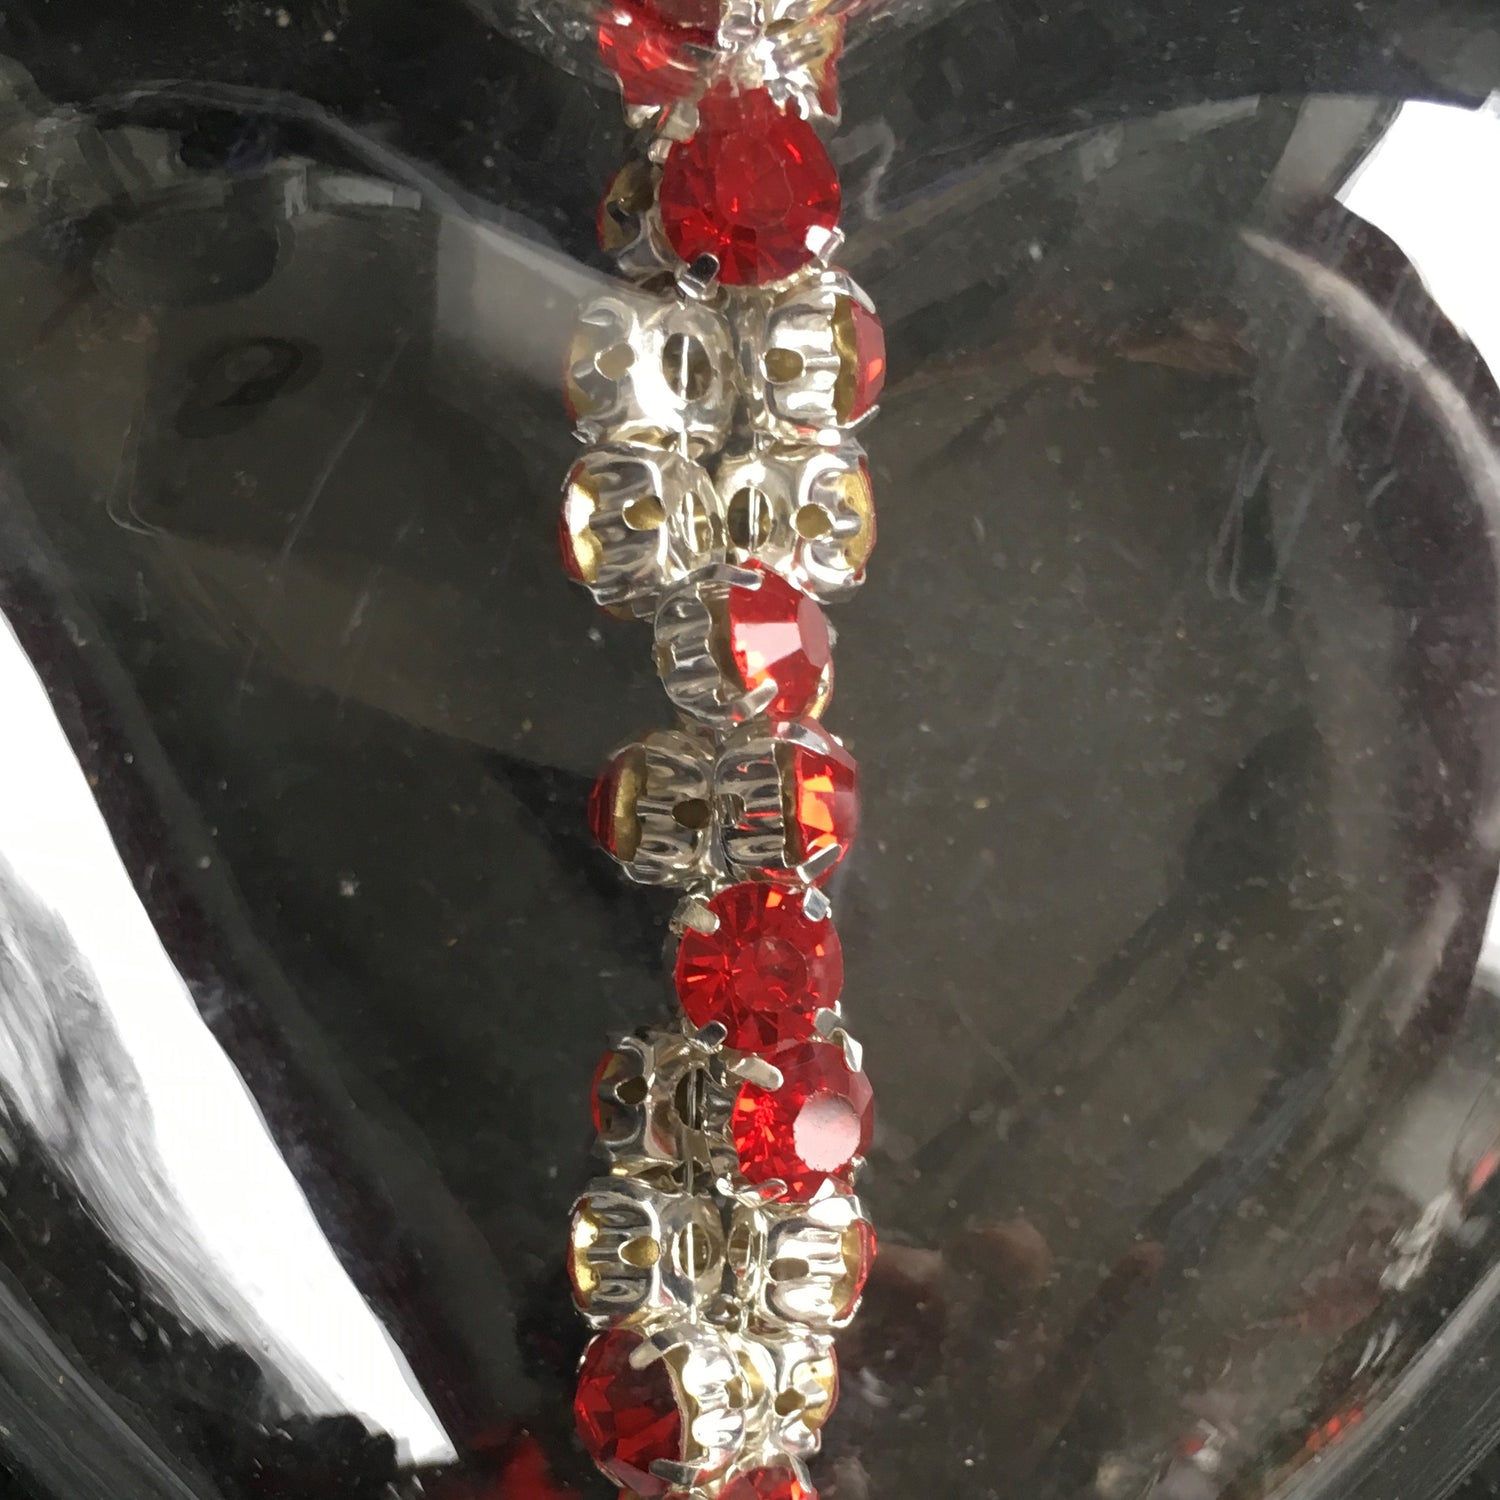 Clear Handmade Glass Decoration with Red and Diamonte Sparkles For The Christmas Tree